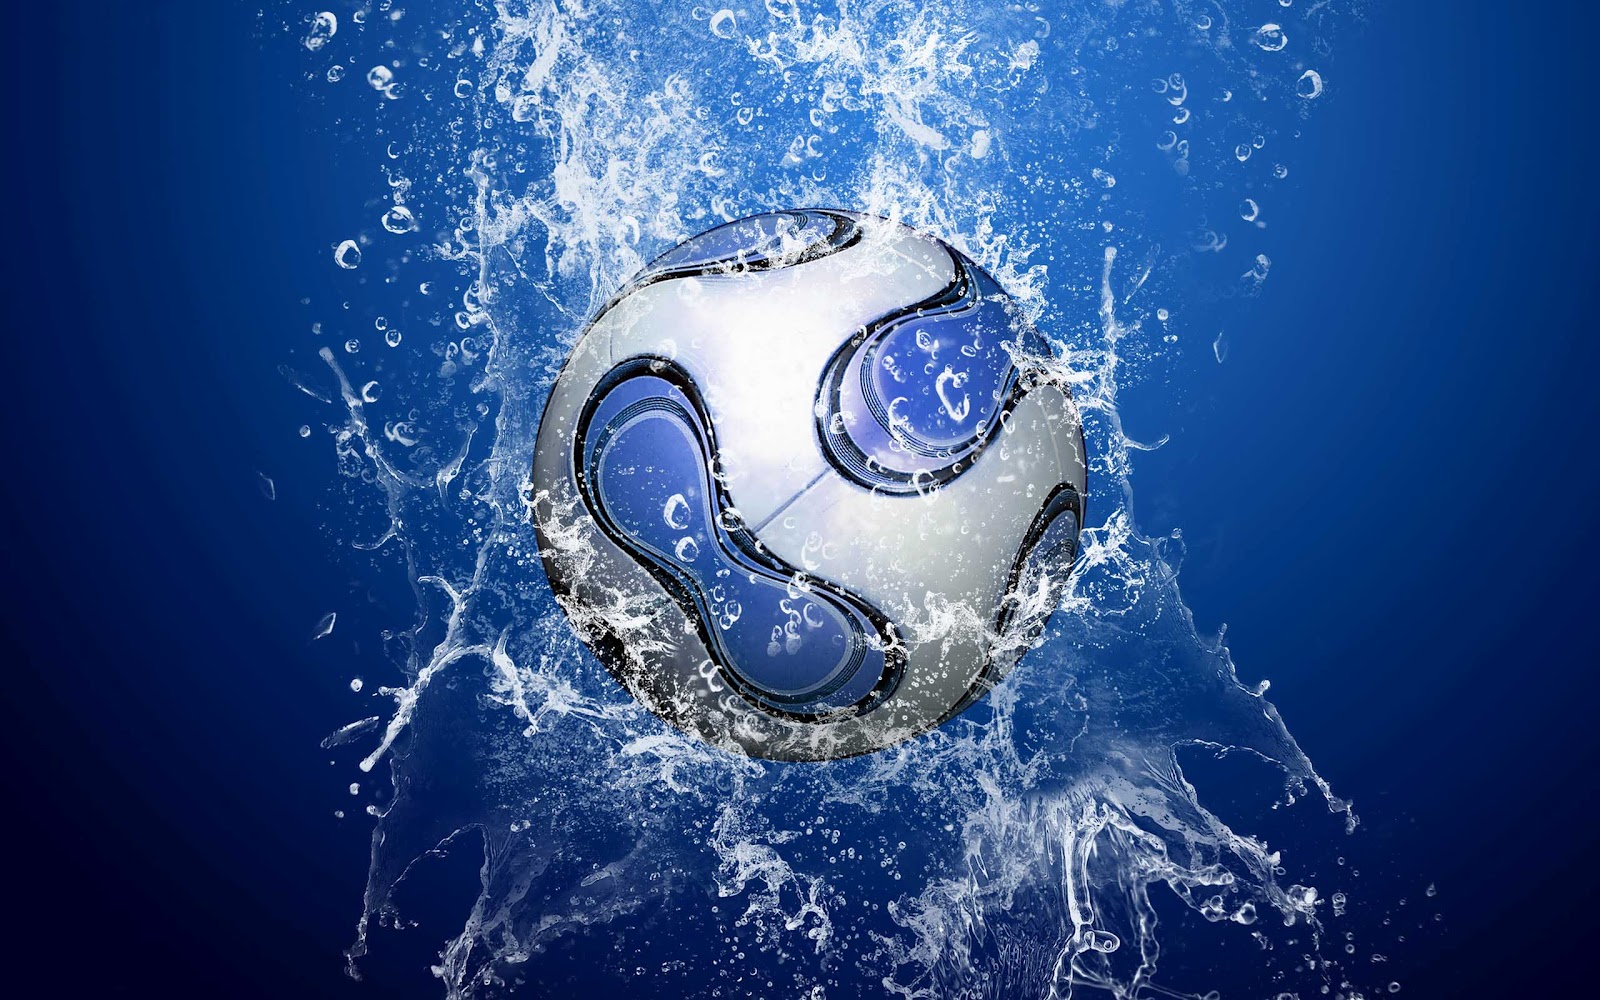 [70+] Cool Soccer Backgrounds on WallpaperSafari